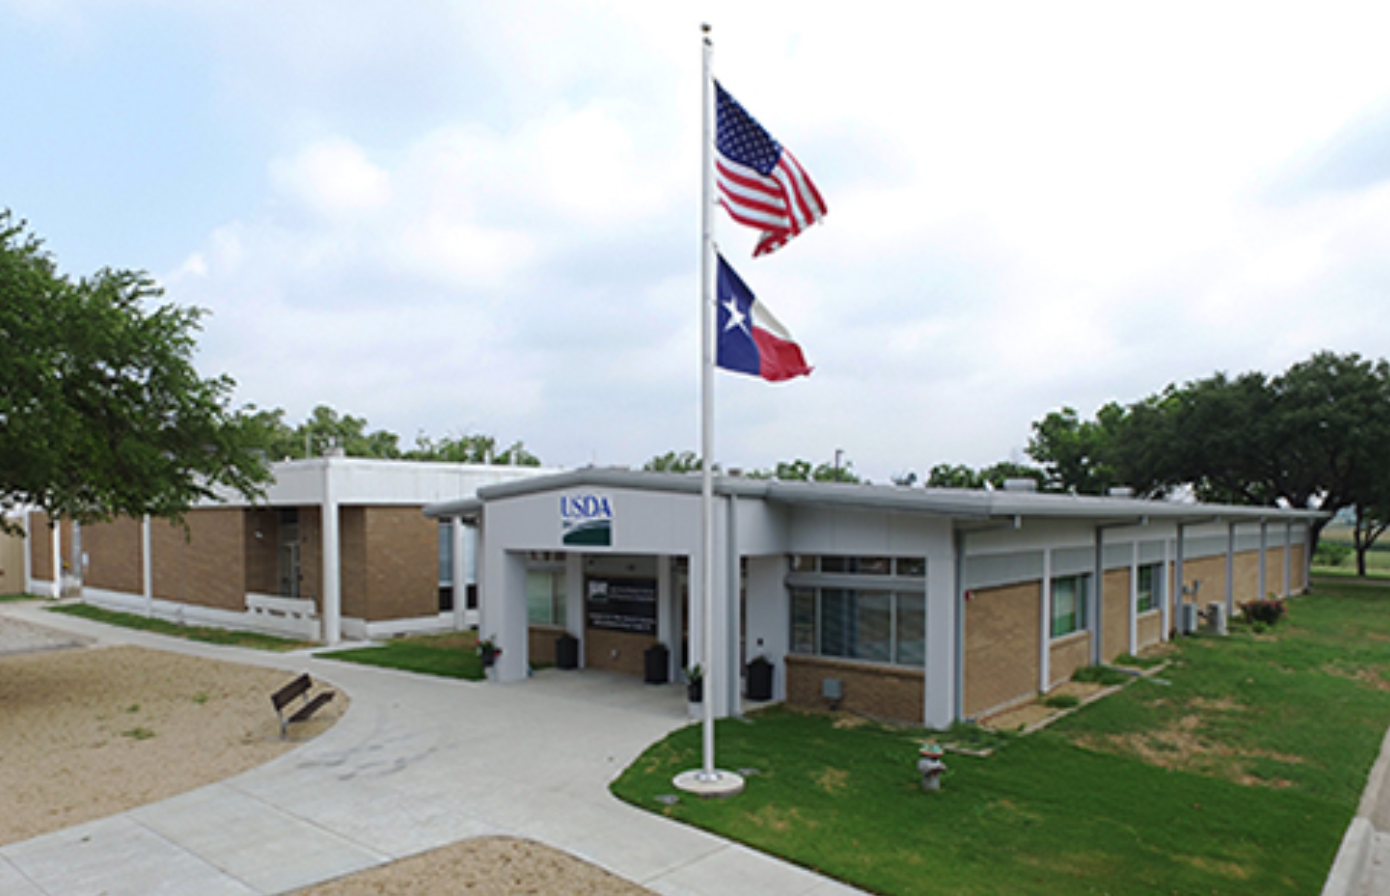 The Grassland, Soil, and Water Research Laboratory in Temple, TX. Image courtesty of USDA.